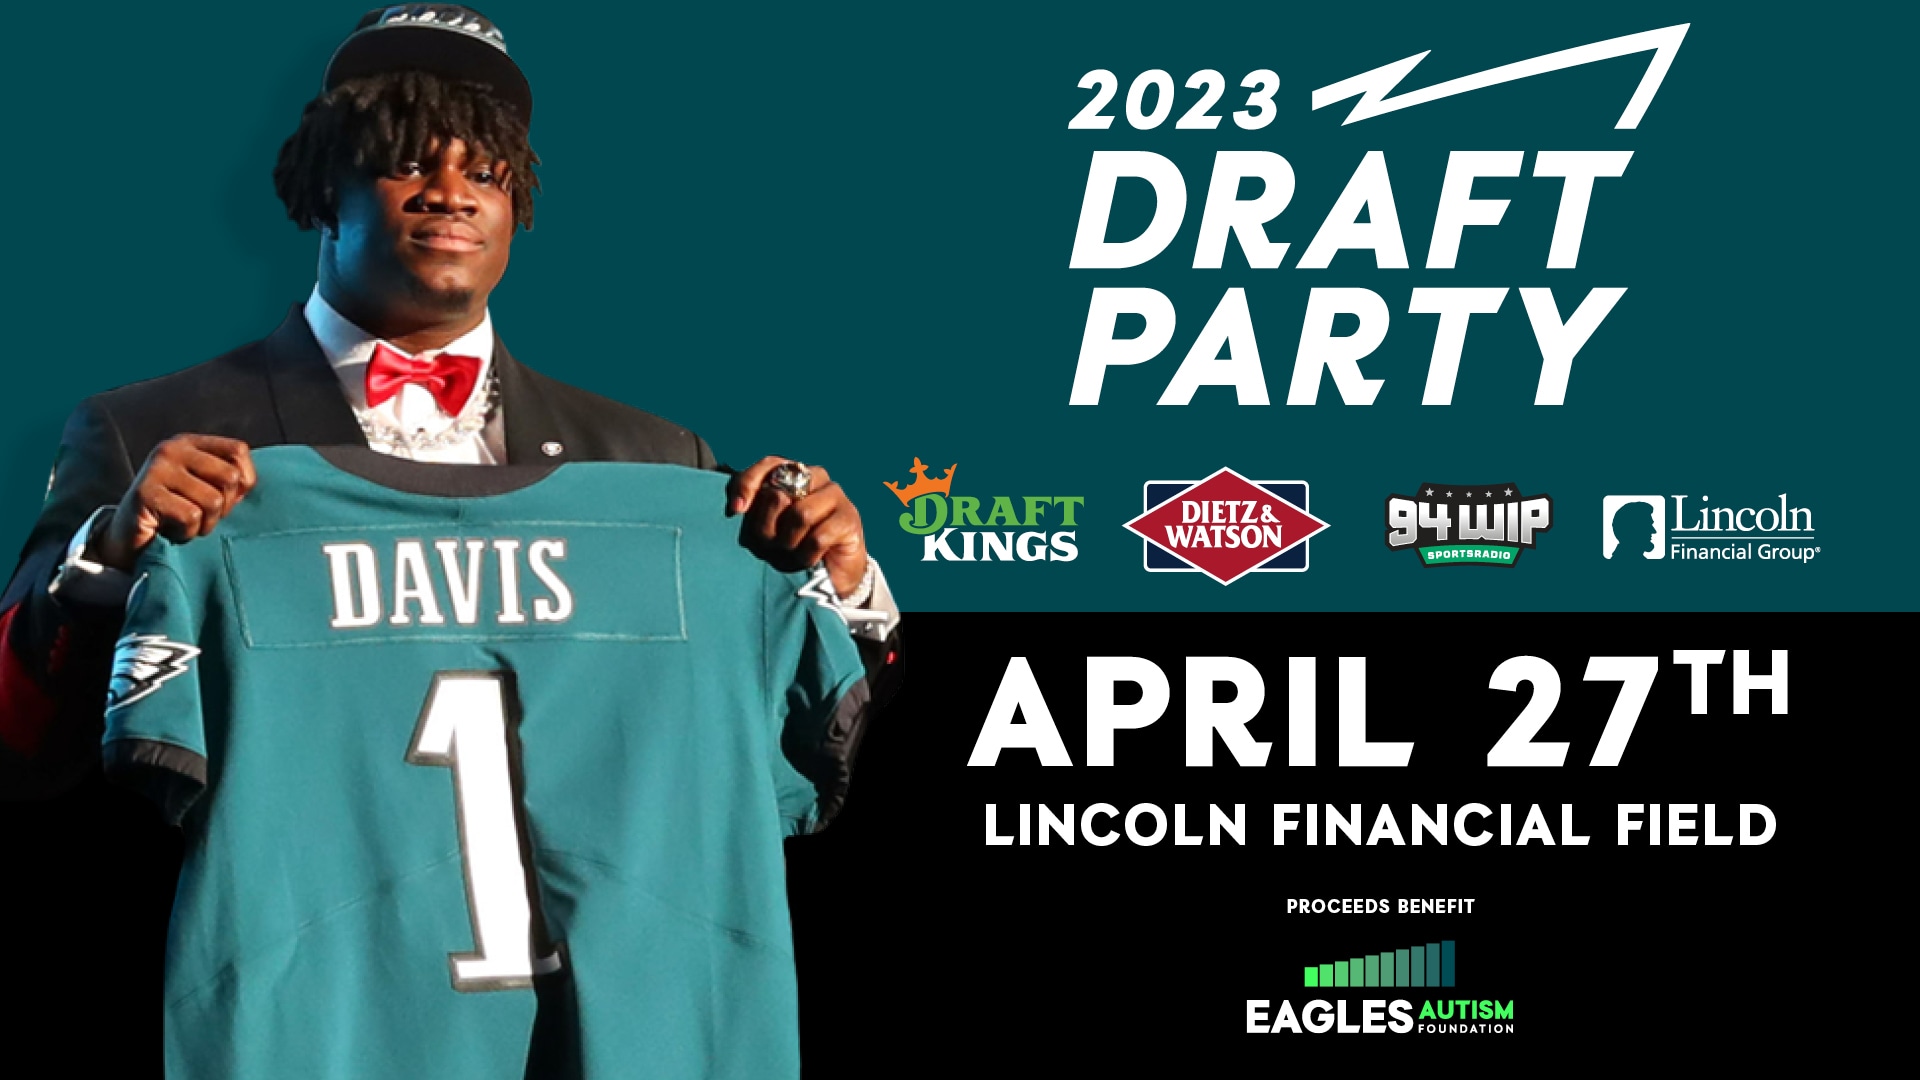 Philadelphia Eagles Draft Party at Lincoln Financial Field